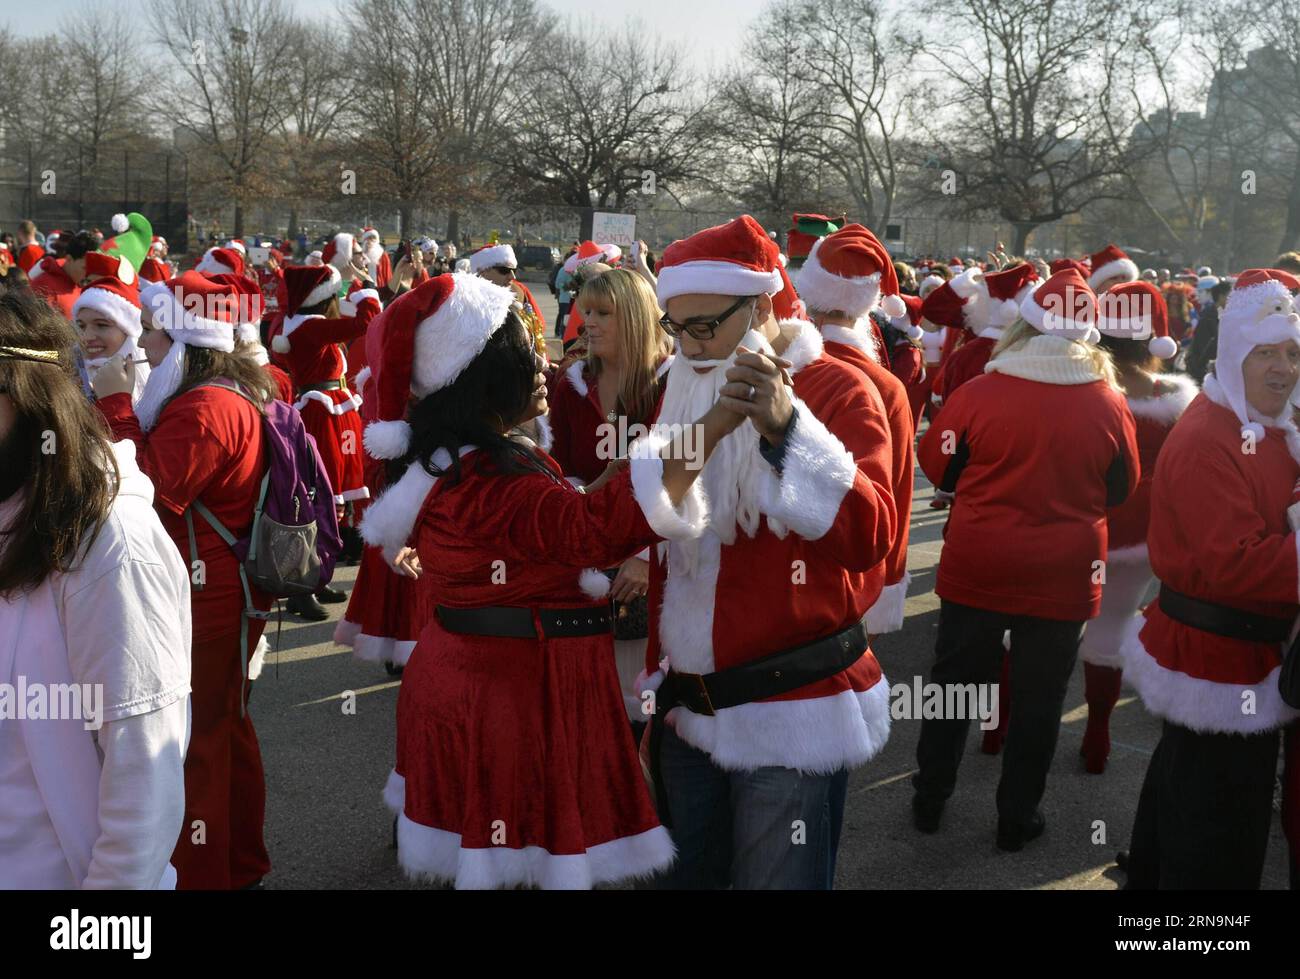 (151212) -- NEW YORK, Dec. 12, 2015 -- People dressed as Santa Claus take part in SantaCon 2015 in New York, the United States, on Dec. 12, 2015. SantaCon 2015 kicked off Saturday here in New York. SantaCon, a celebration that calls for attendees to dress as Santas and follow a pre-planned route of bar-hopping, is celebrated in cities across the U.S. and the world.) U.S.-NEW YORK-SANTACON 2015-CELEBRATION WangxLei PUBLICATIONxNOTxINxCHN   151212 New York DEC 12 2015 Celebrities Dressed As Santa Claus Take Part in Santacon 2015 in New York The United States ON DEC 12 2015 Santacon 2015 kicked o Stock Photo